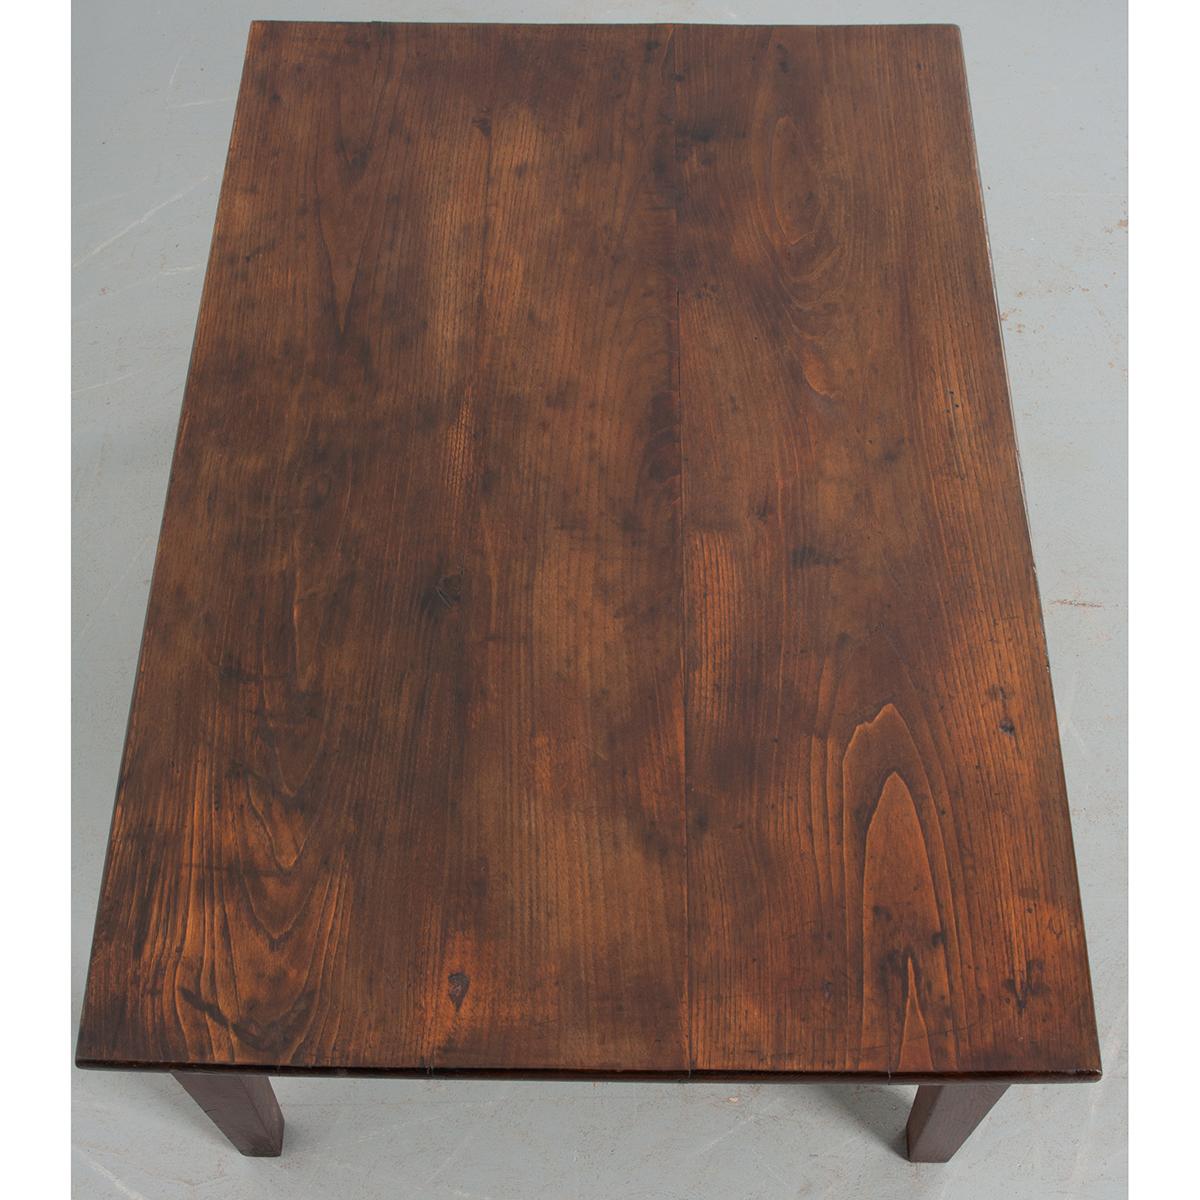 This rich oak coffee table is from France circa 1860. The smooth, waxed top is constructed of three boards that highlight the rings of the tree from which the table was constructed over 160 years ago. The thick apron is fitted with one working